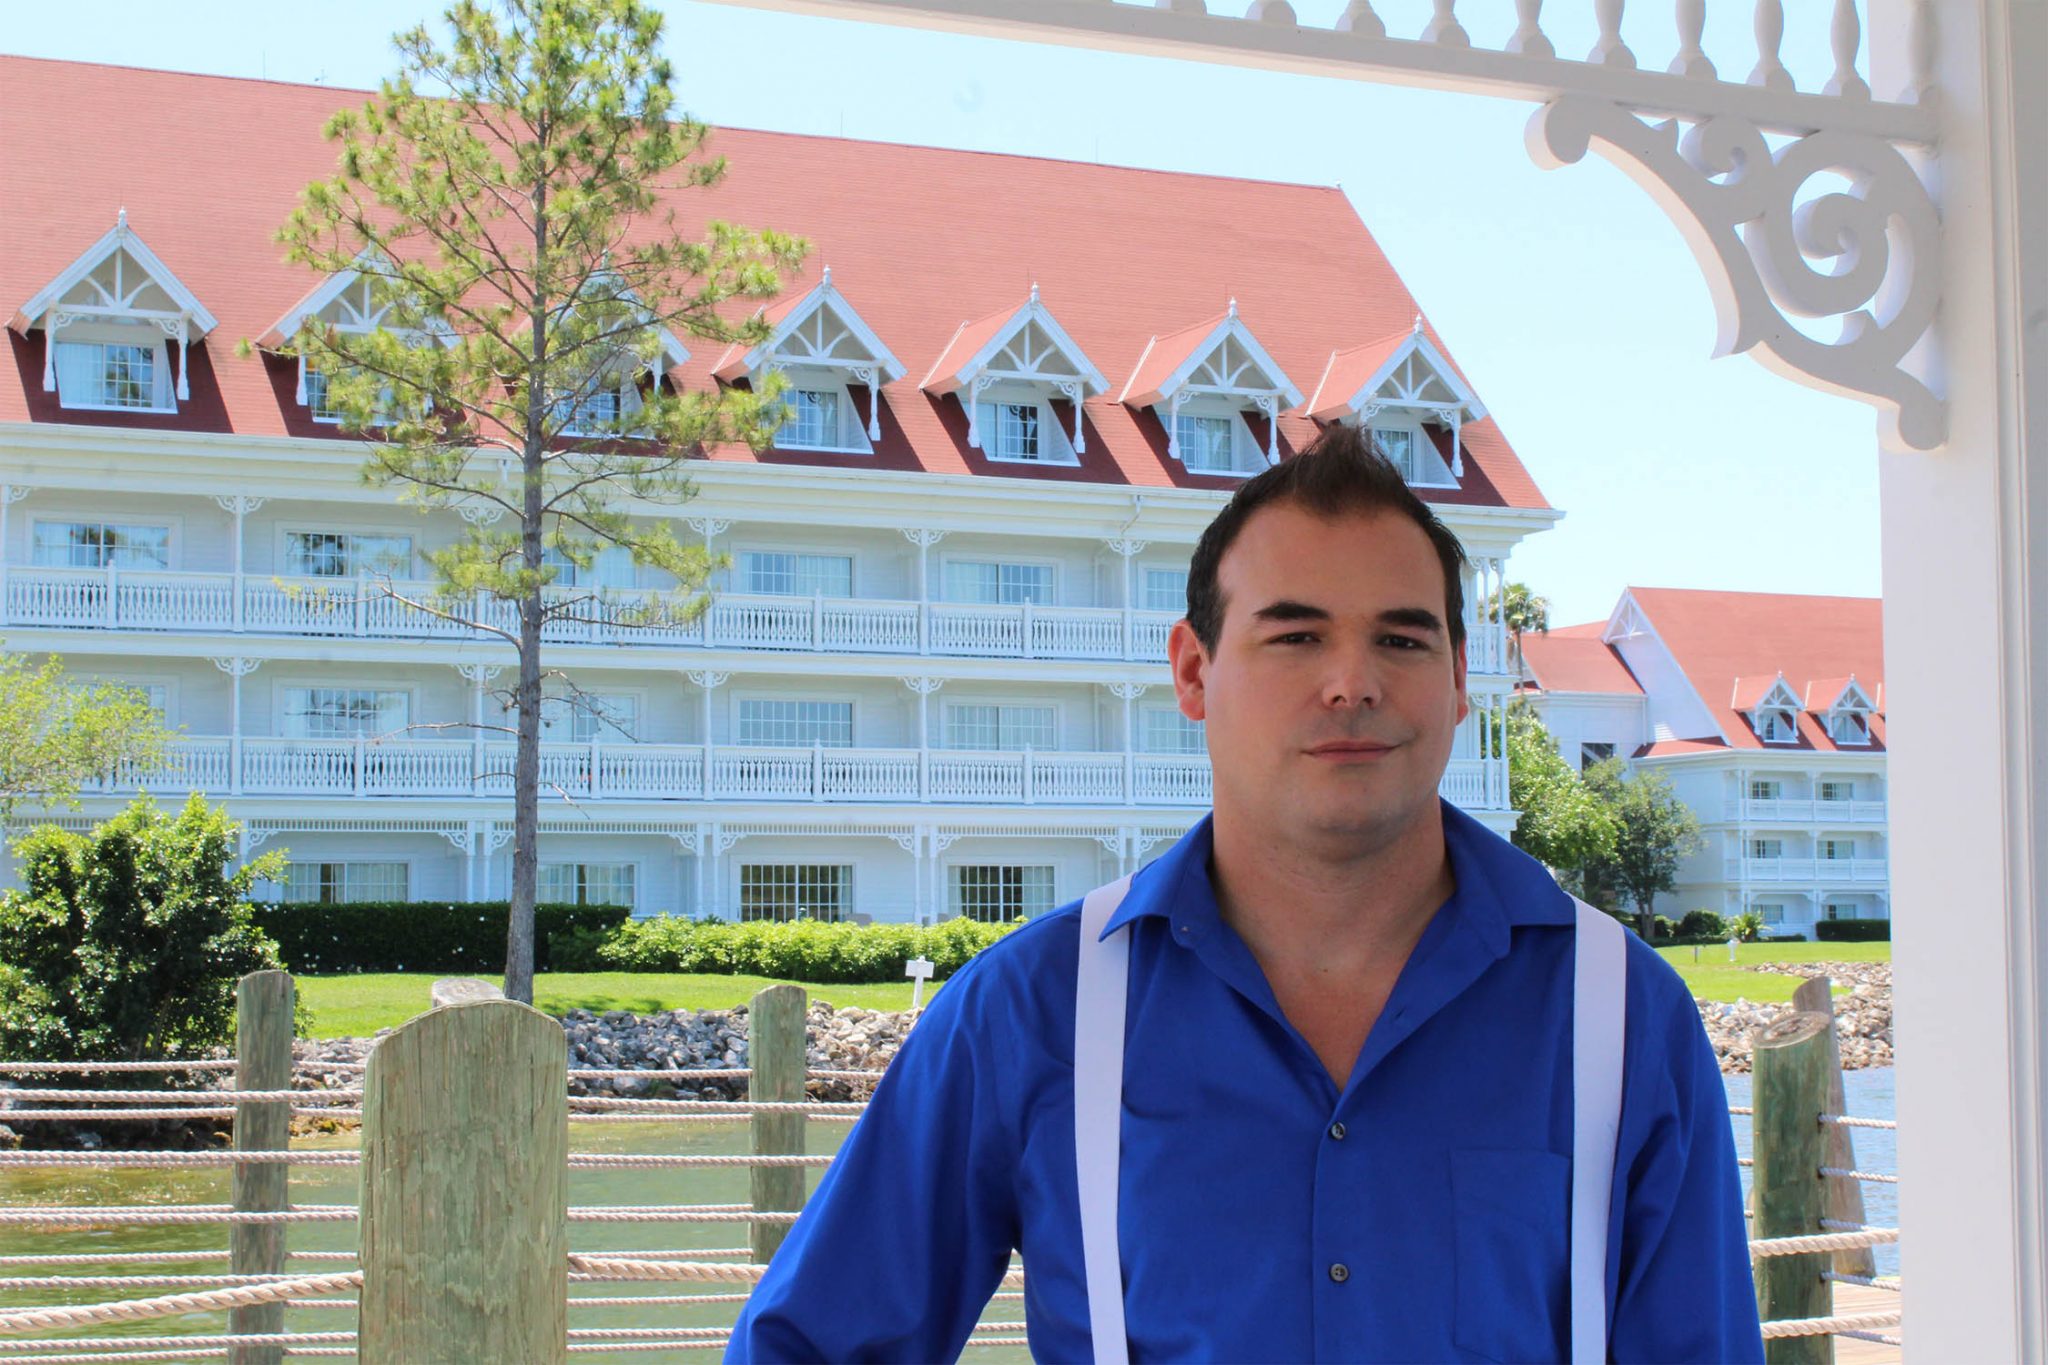 Jay on Dapper Day at the Grand Floridian.